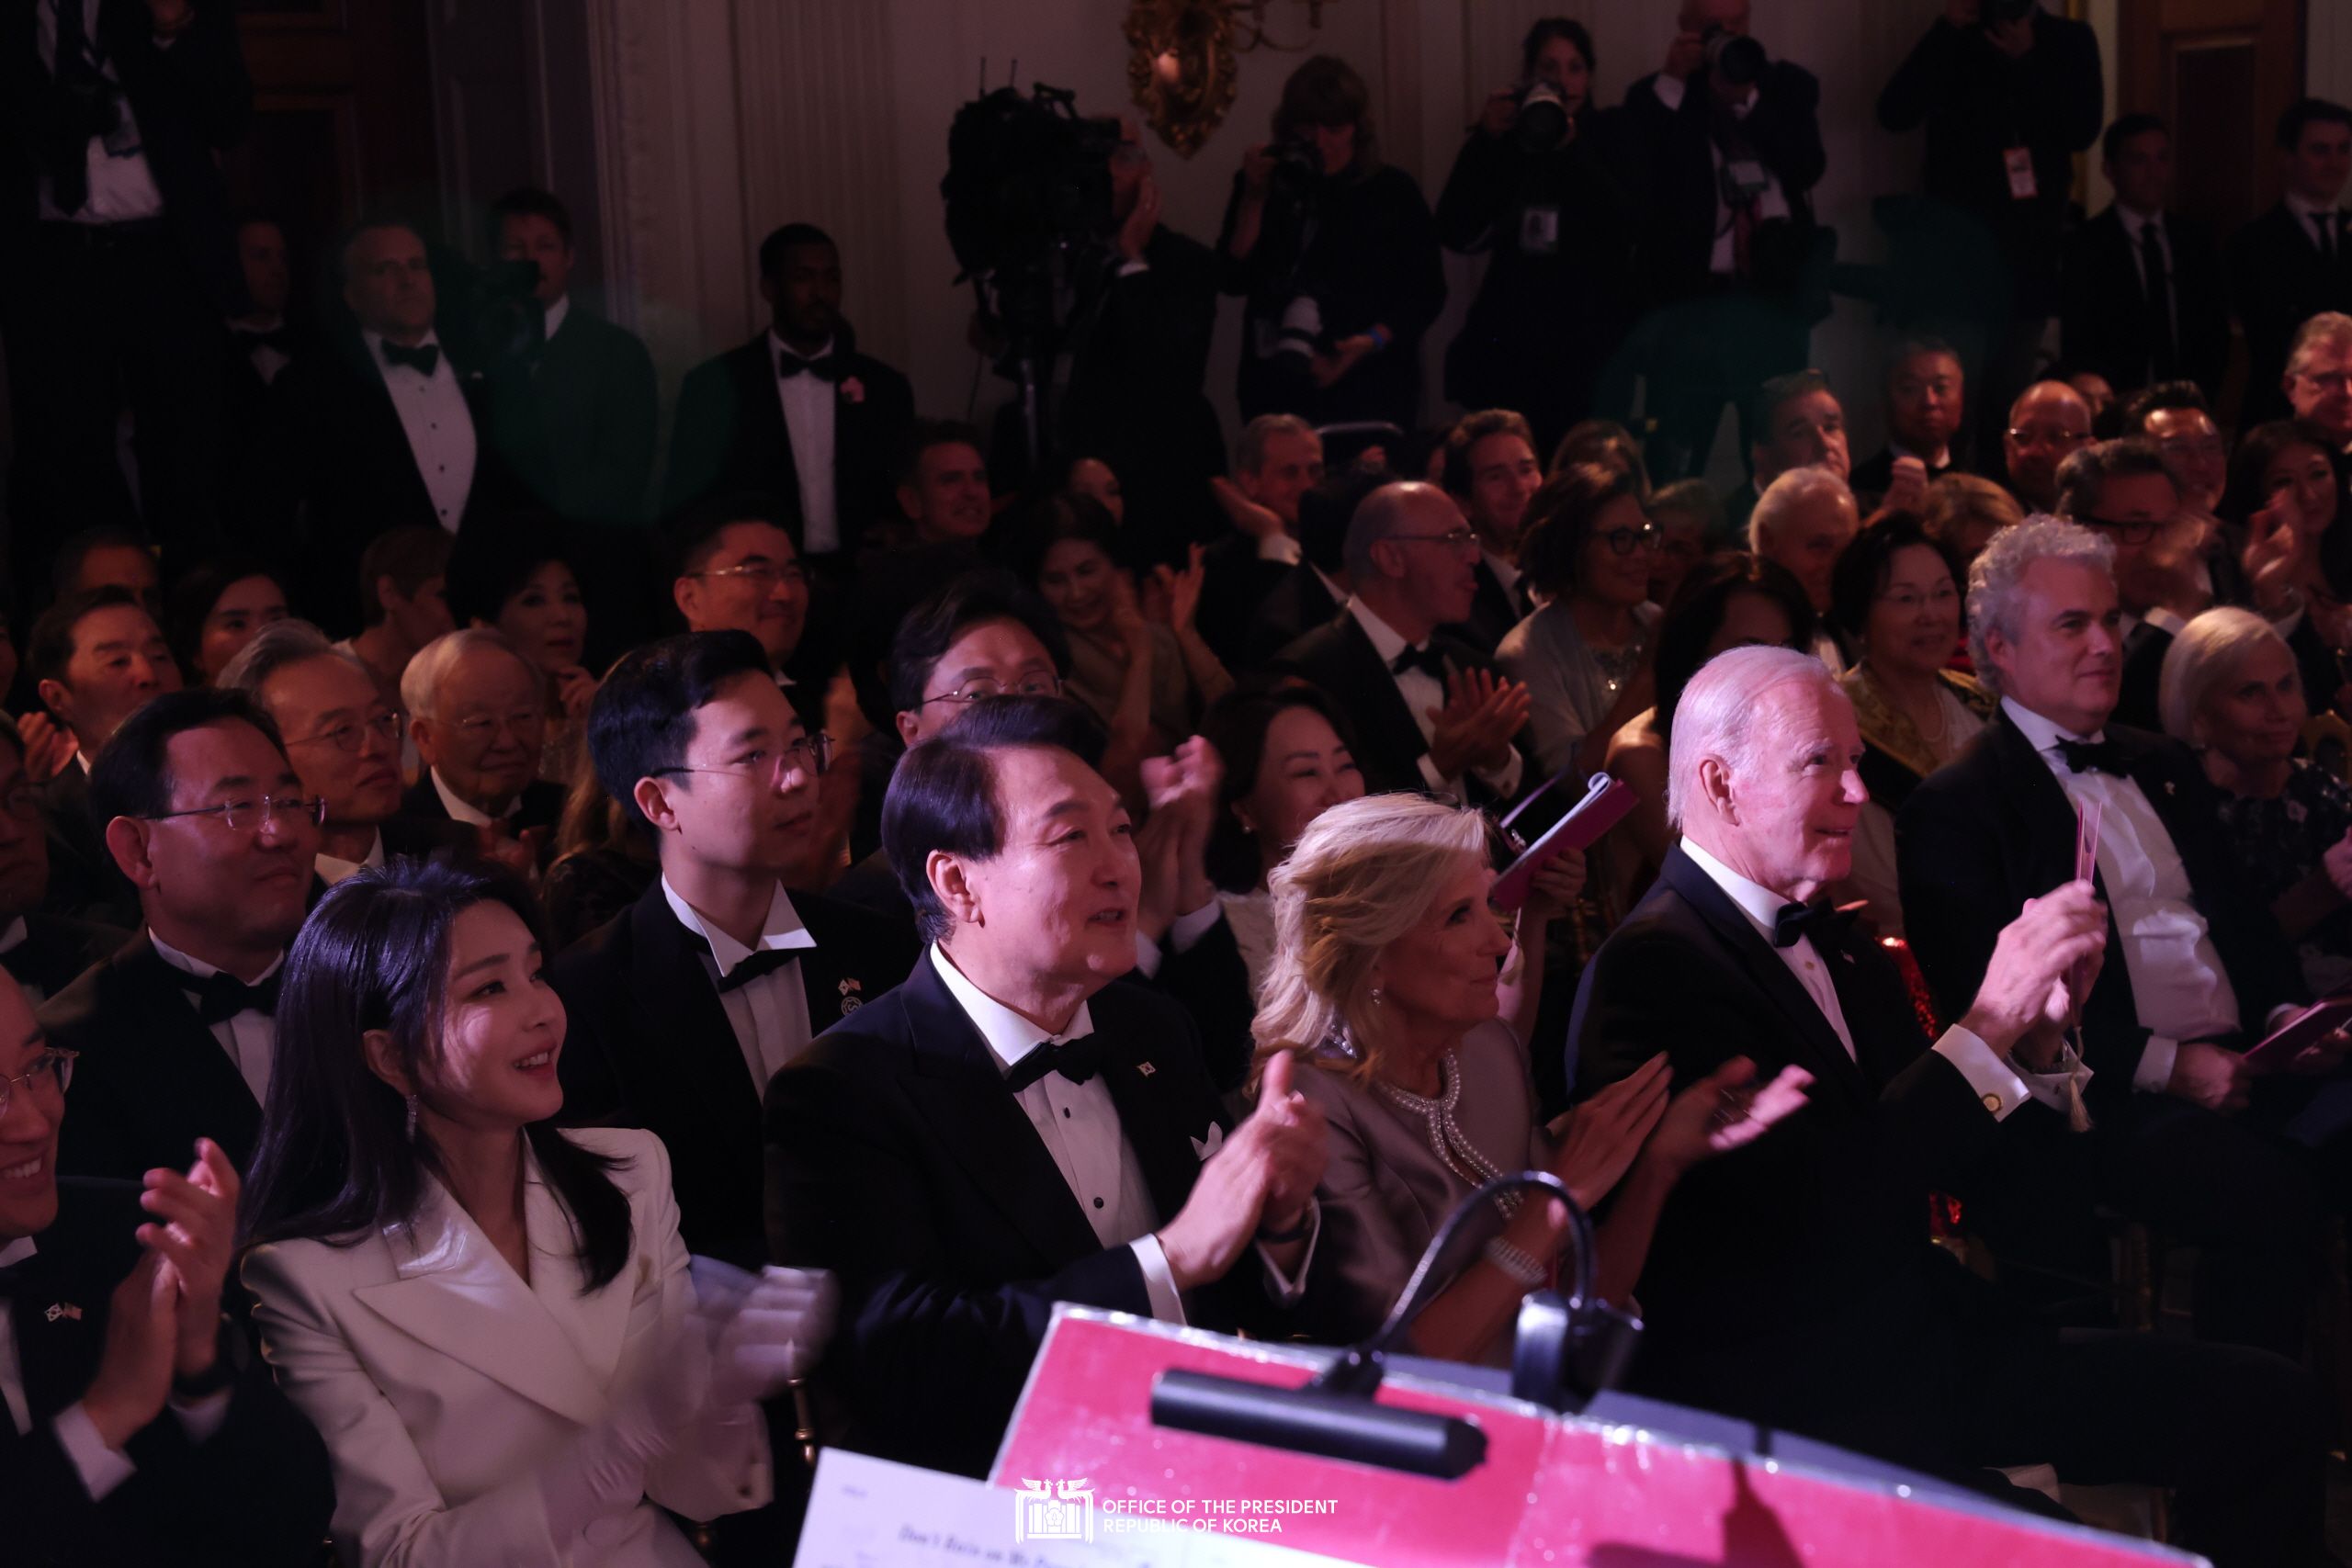 The President and First Lady attending the State Dinner hosted by the U.S. President and First Lady Slide19